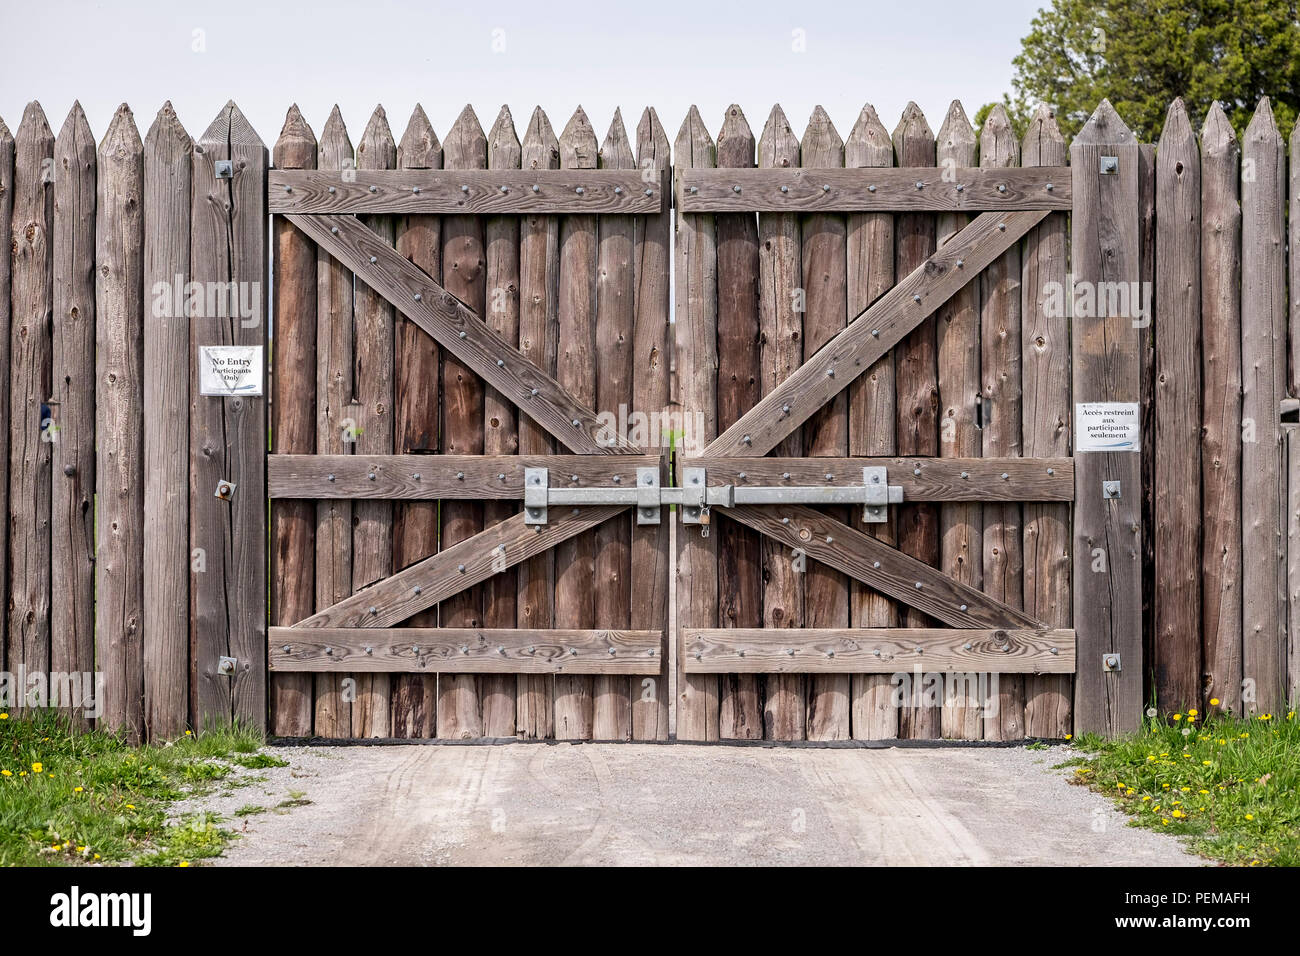 A wooden gate with spiked tops is securely barred at Fort George in Niagara on the Lake Ontario Canada. Stock Photo